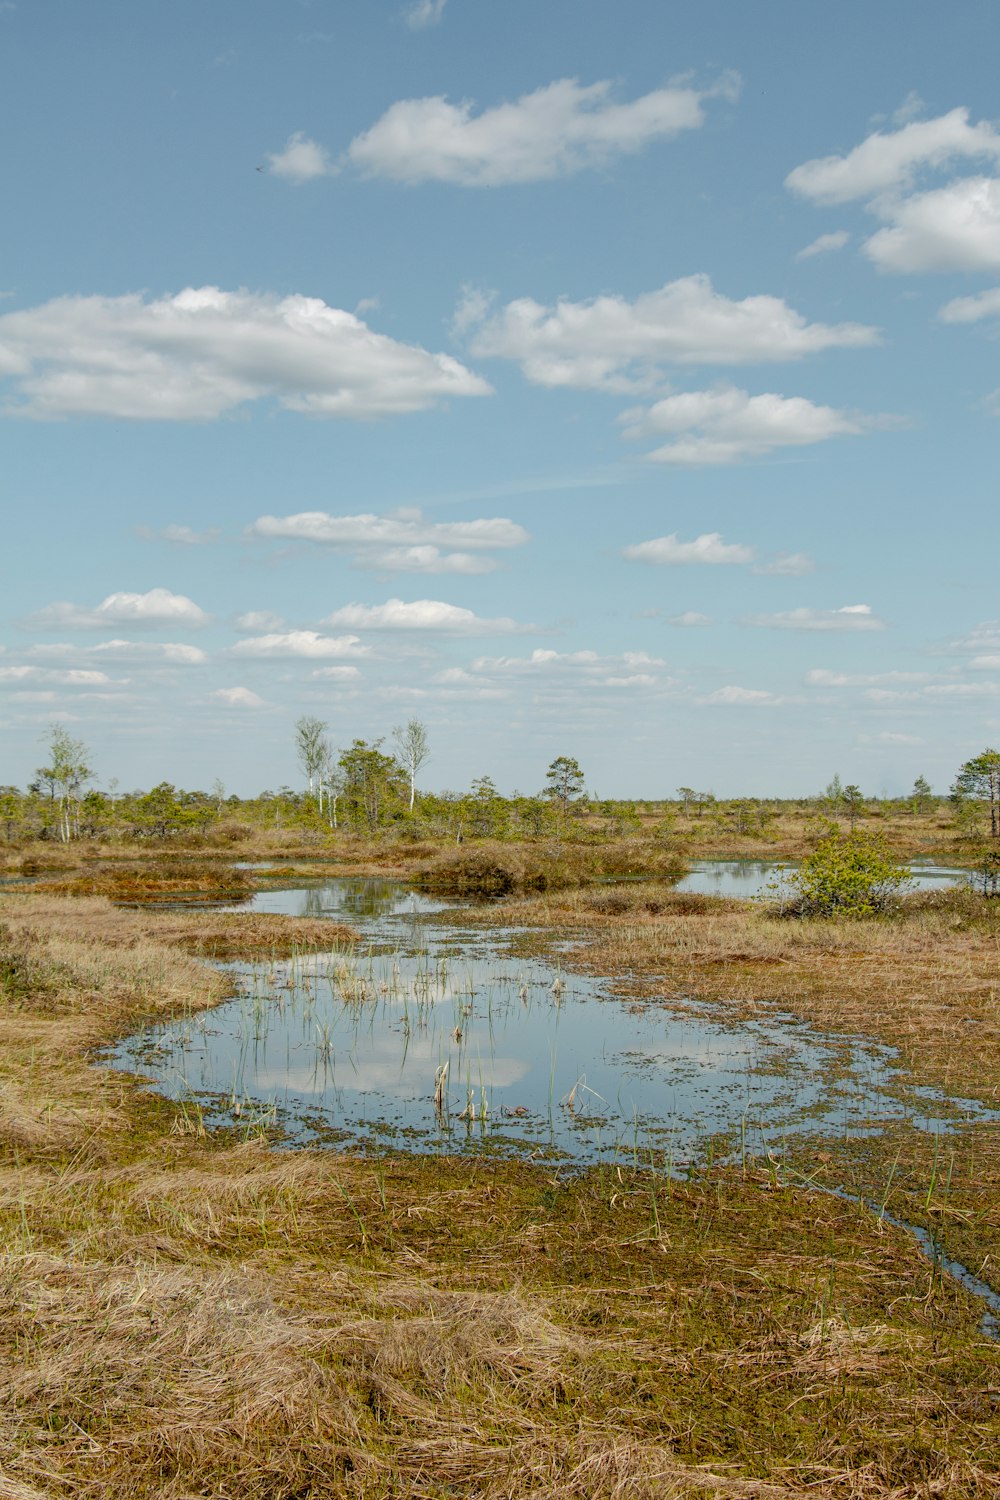 a small pond in the middle of a dry grass field